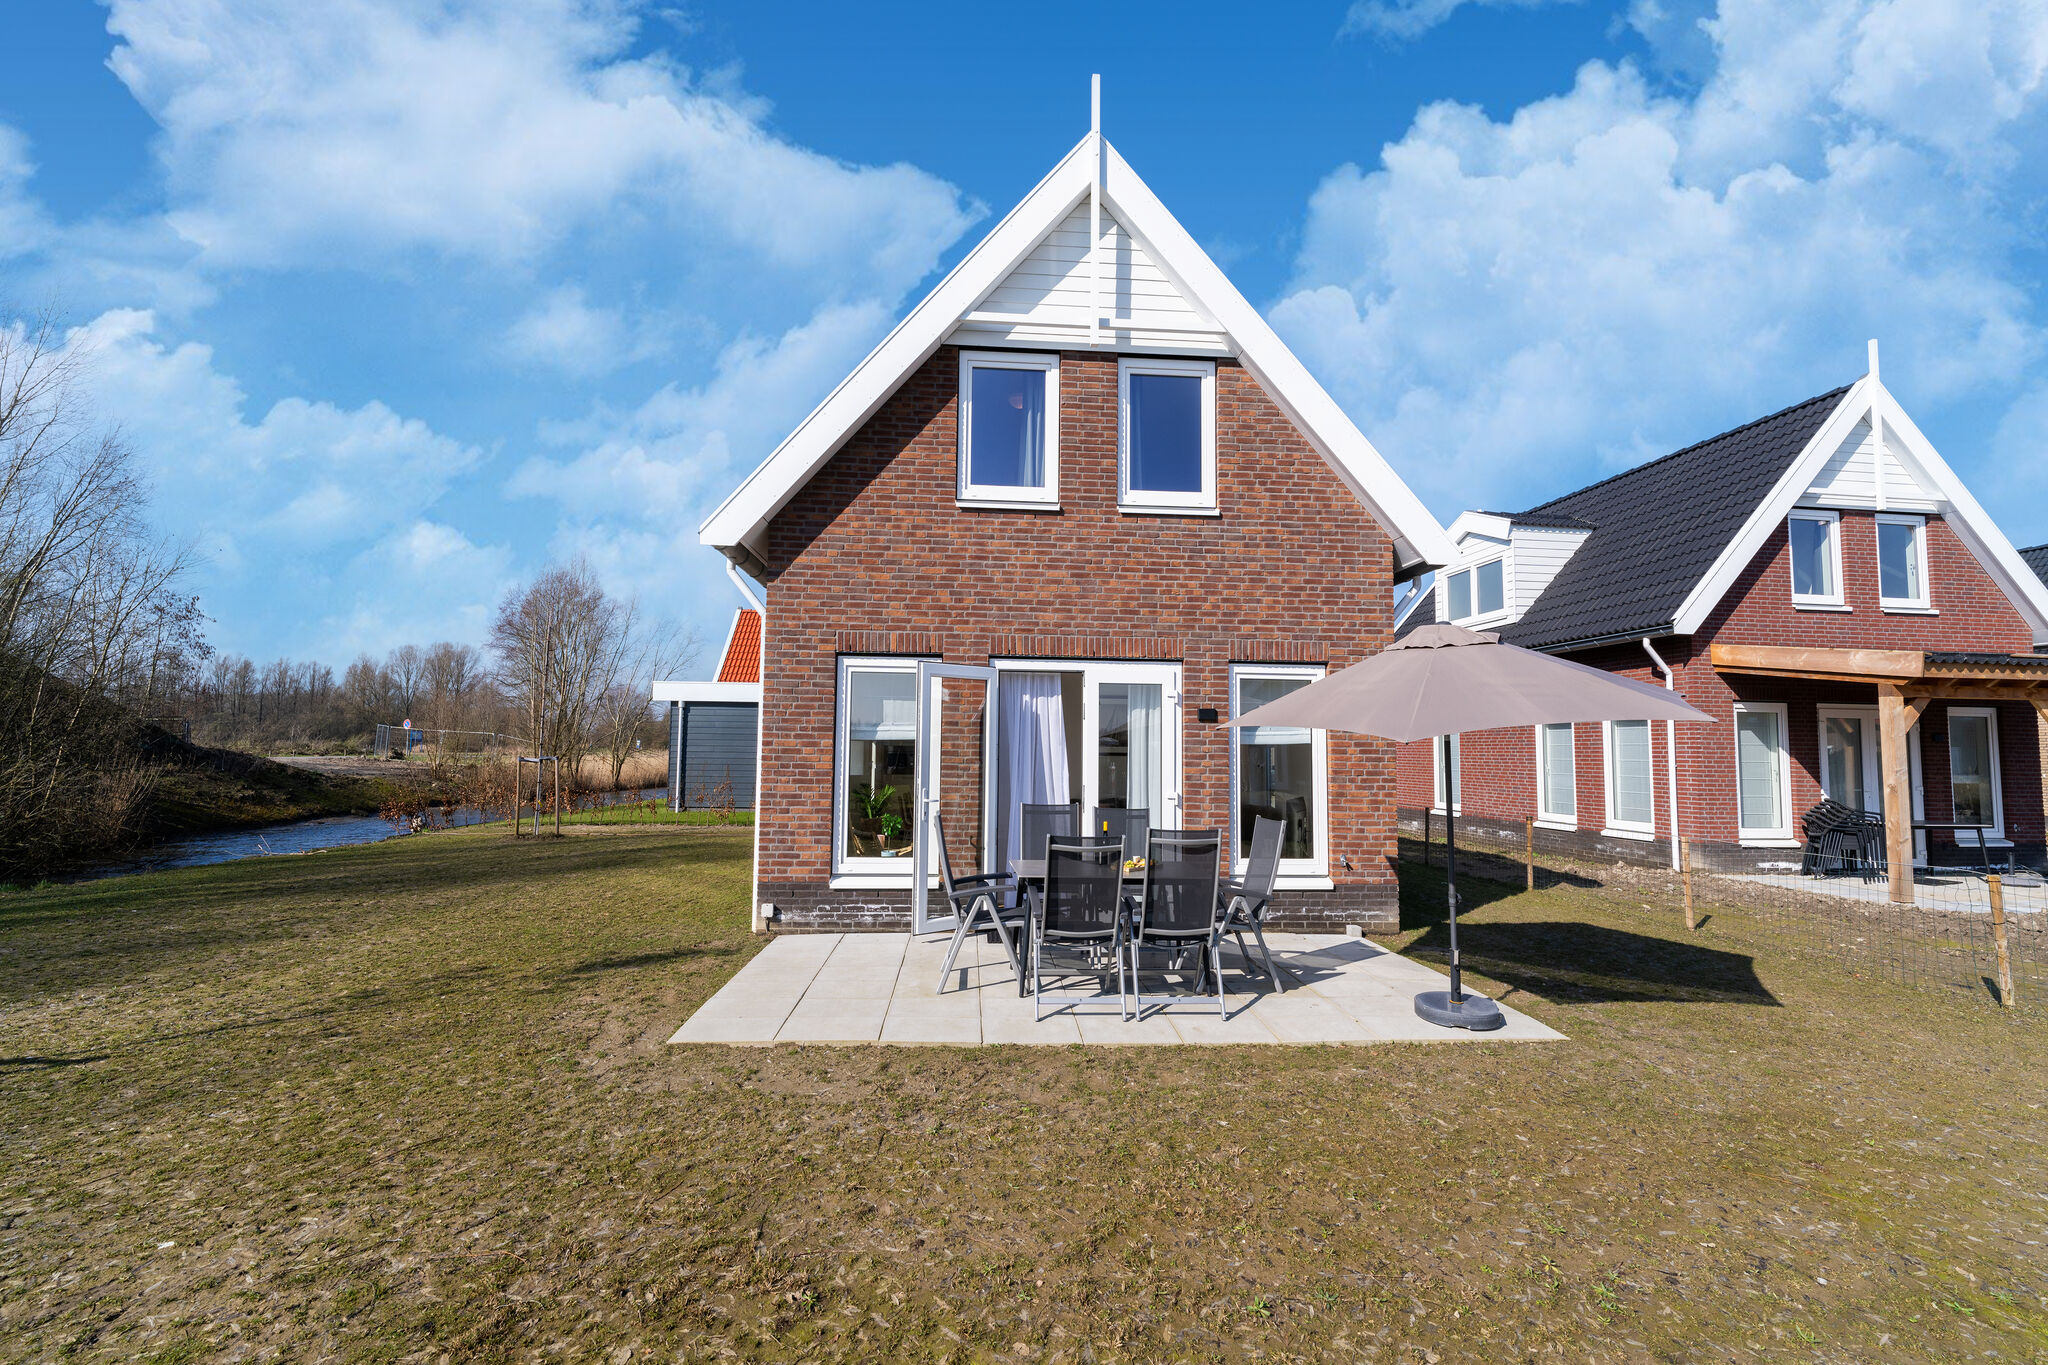 Nice holiday home in Simonshaven near the water